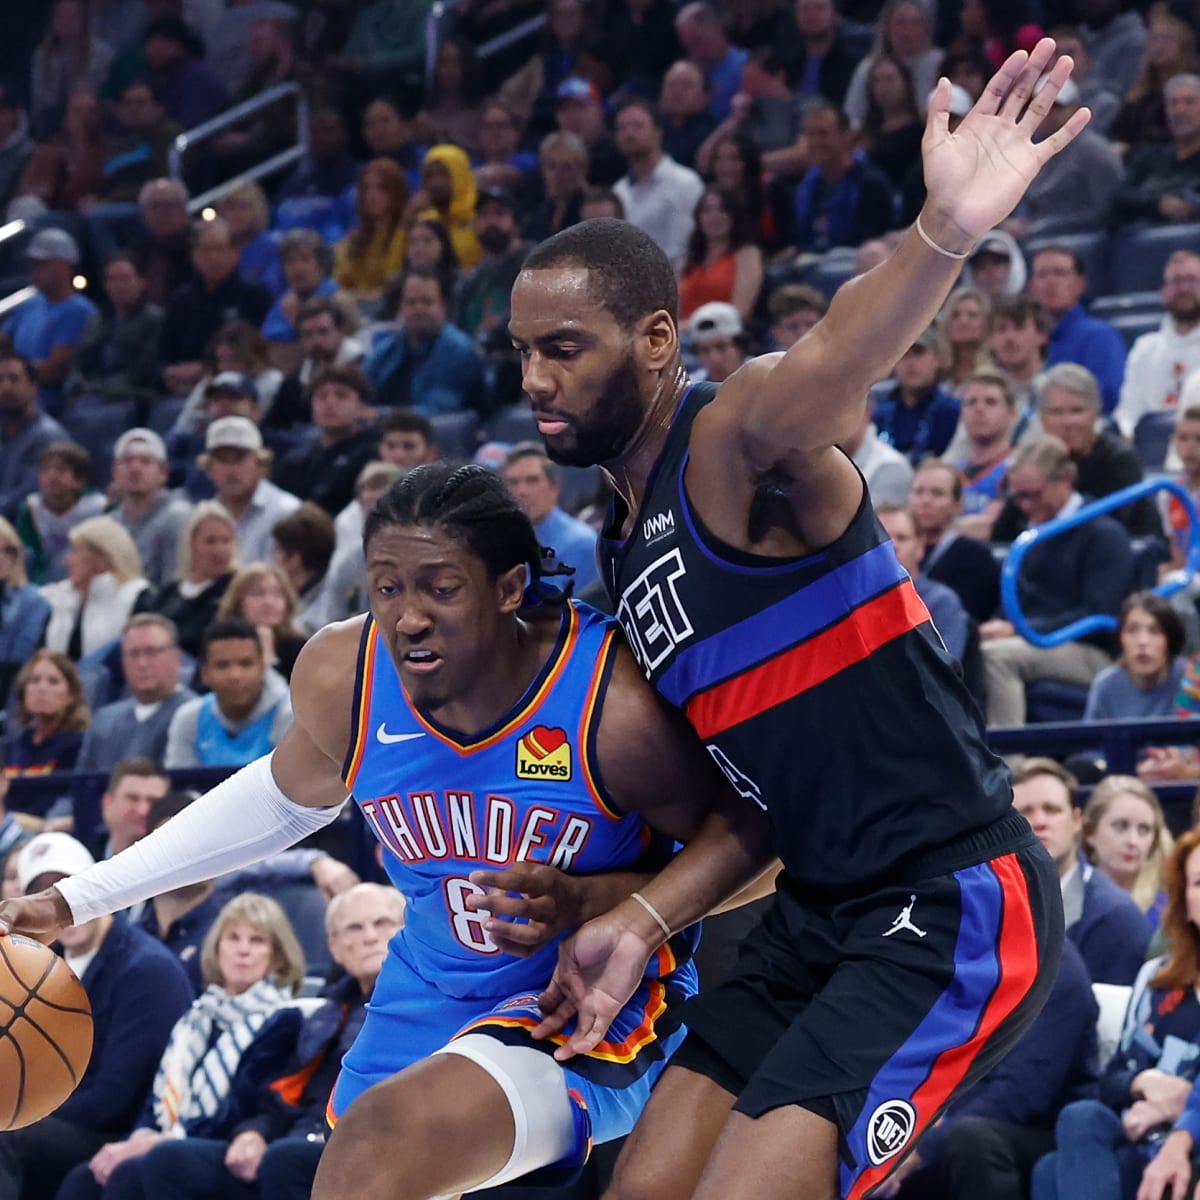 Shai Gilgeous-Alexander shows grit after injury in OKC Thunder loss